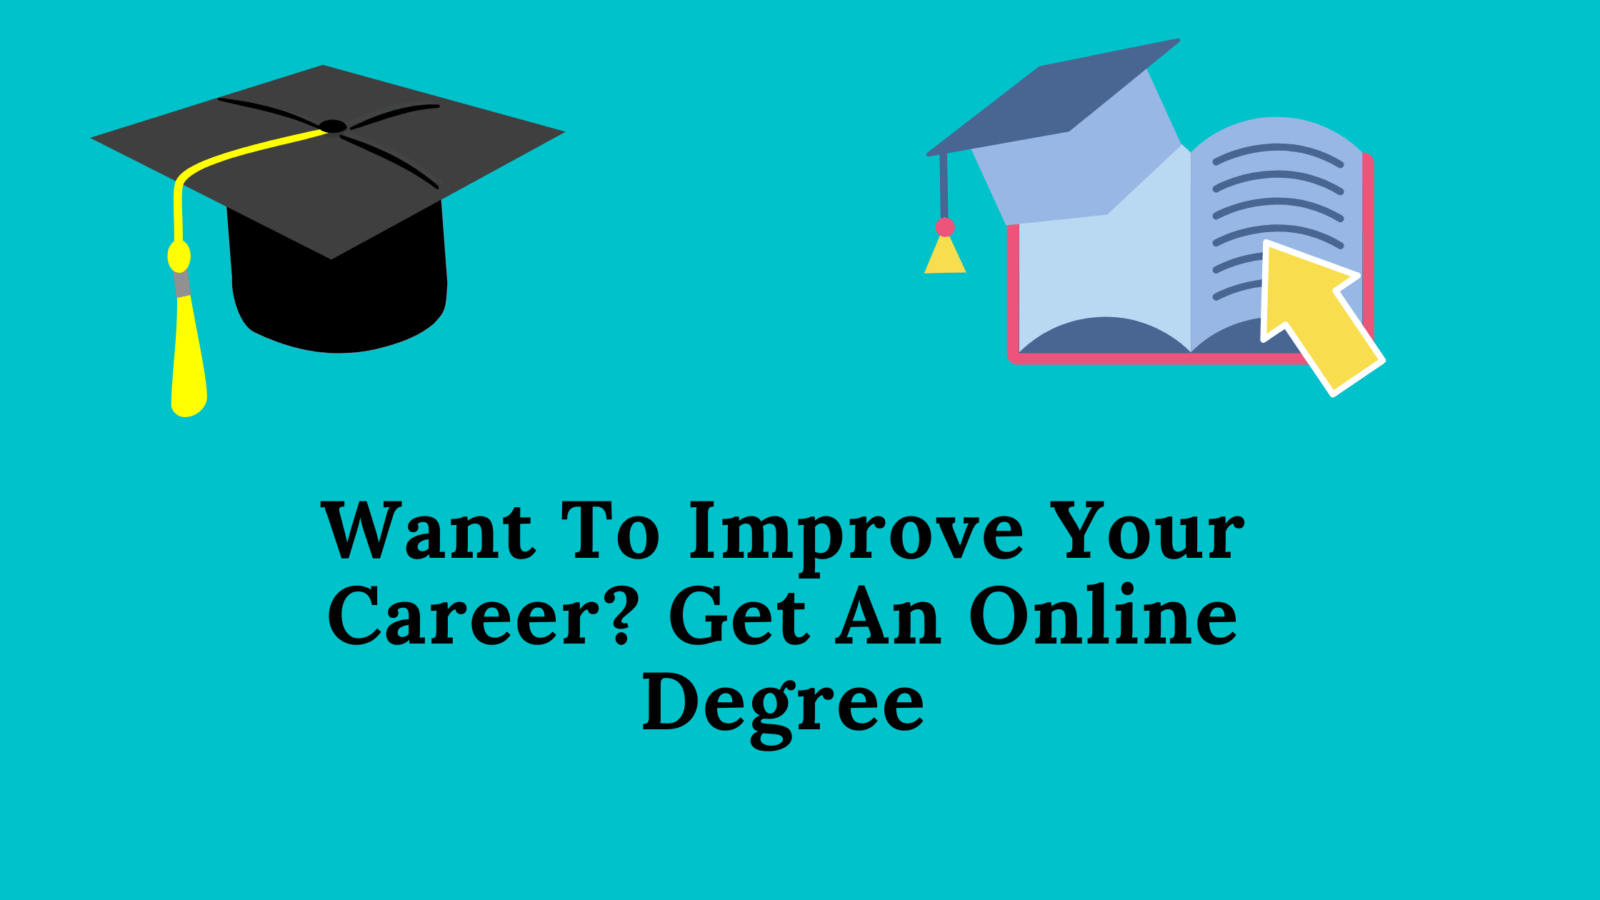 Want To Improve Your Career? Get An Online Degree